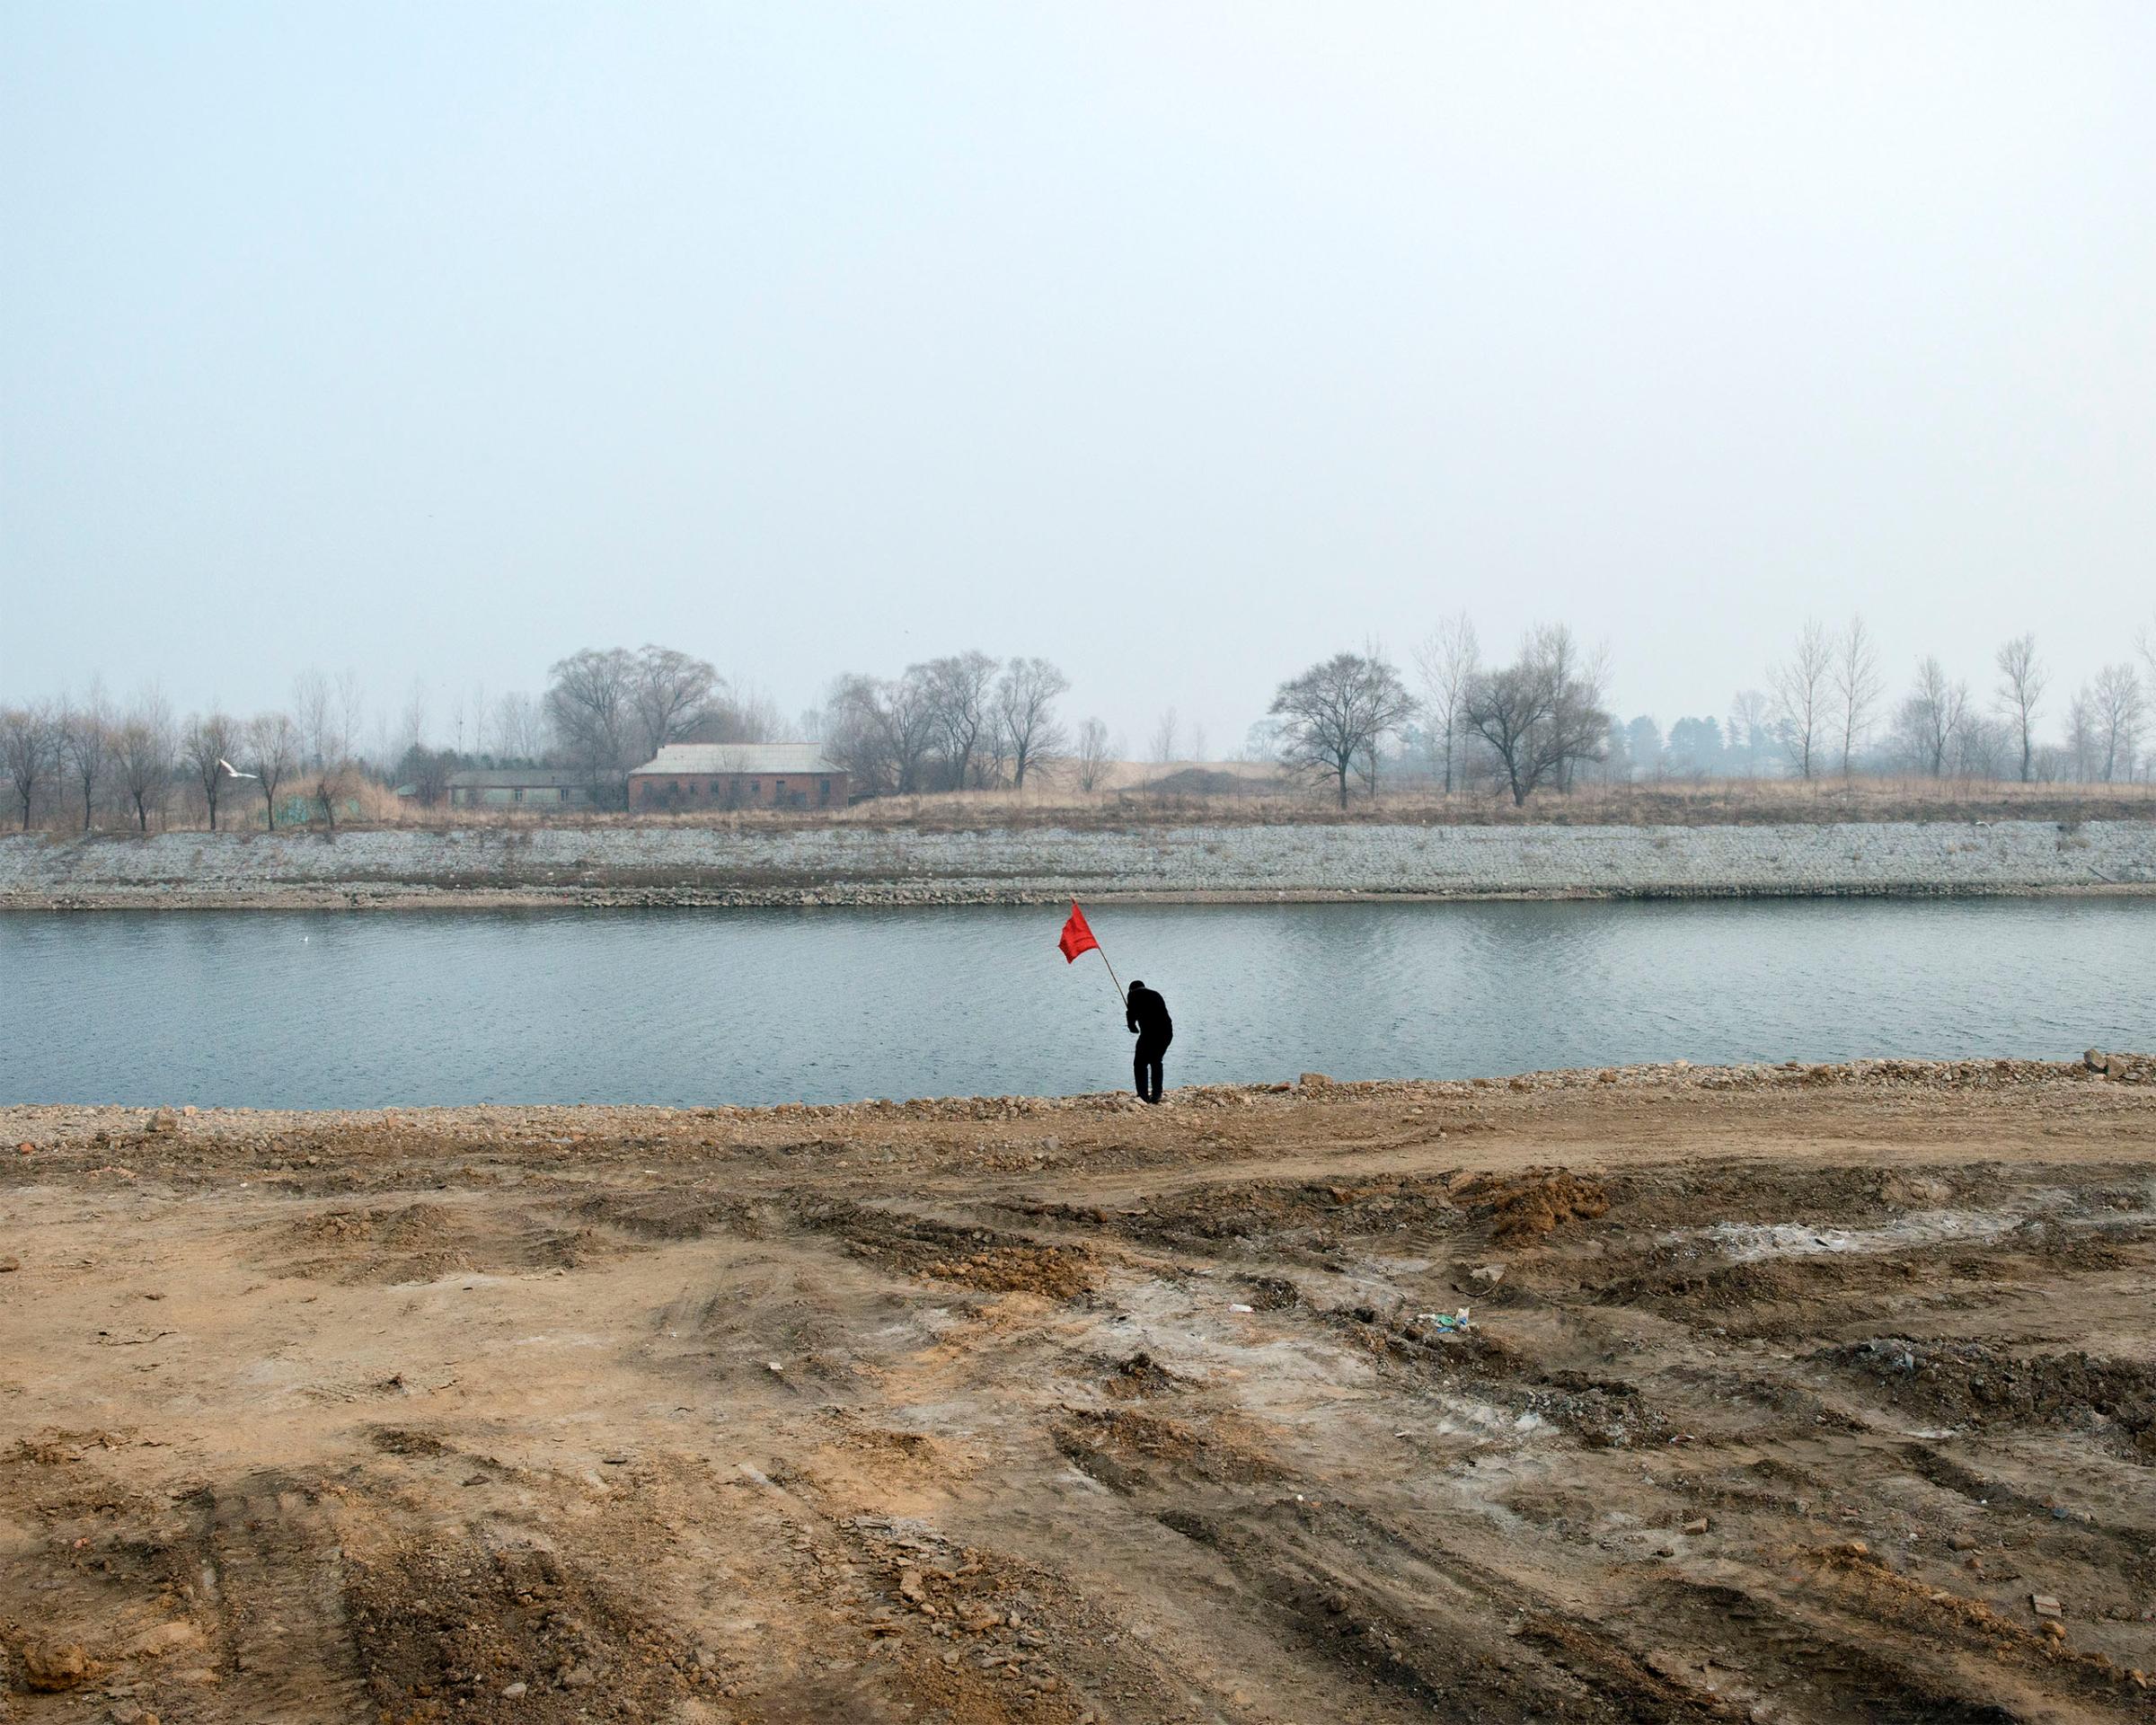 A man places a red flag at the river bank across from north korea border in Dandong, China.